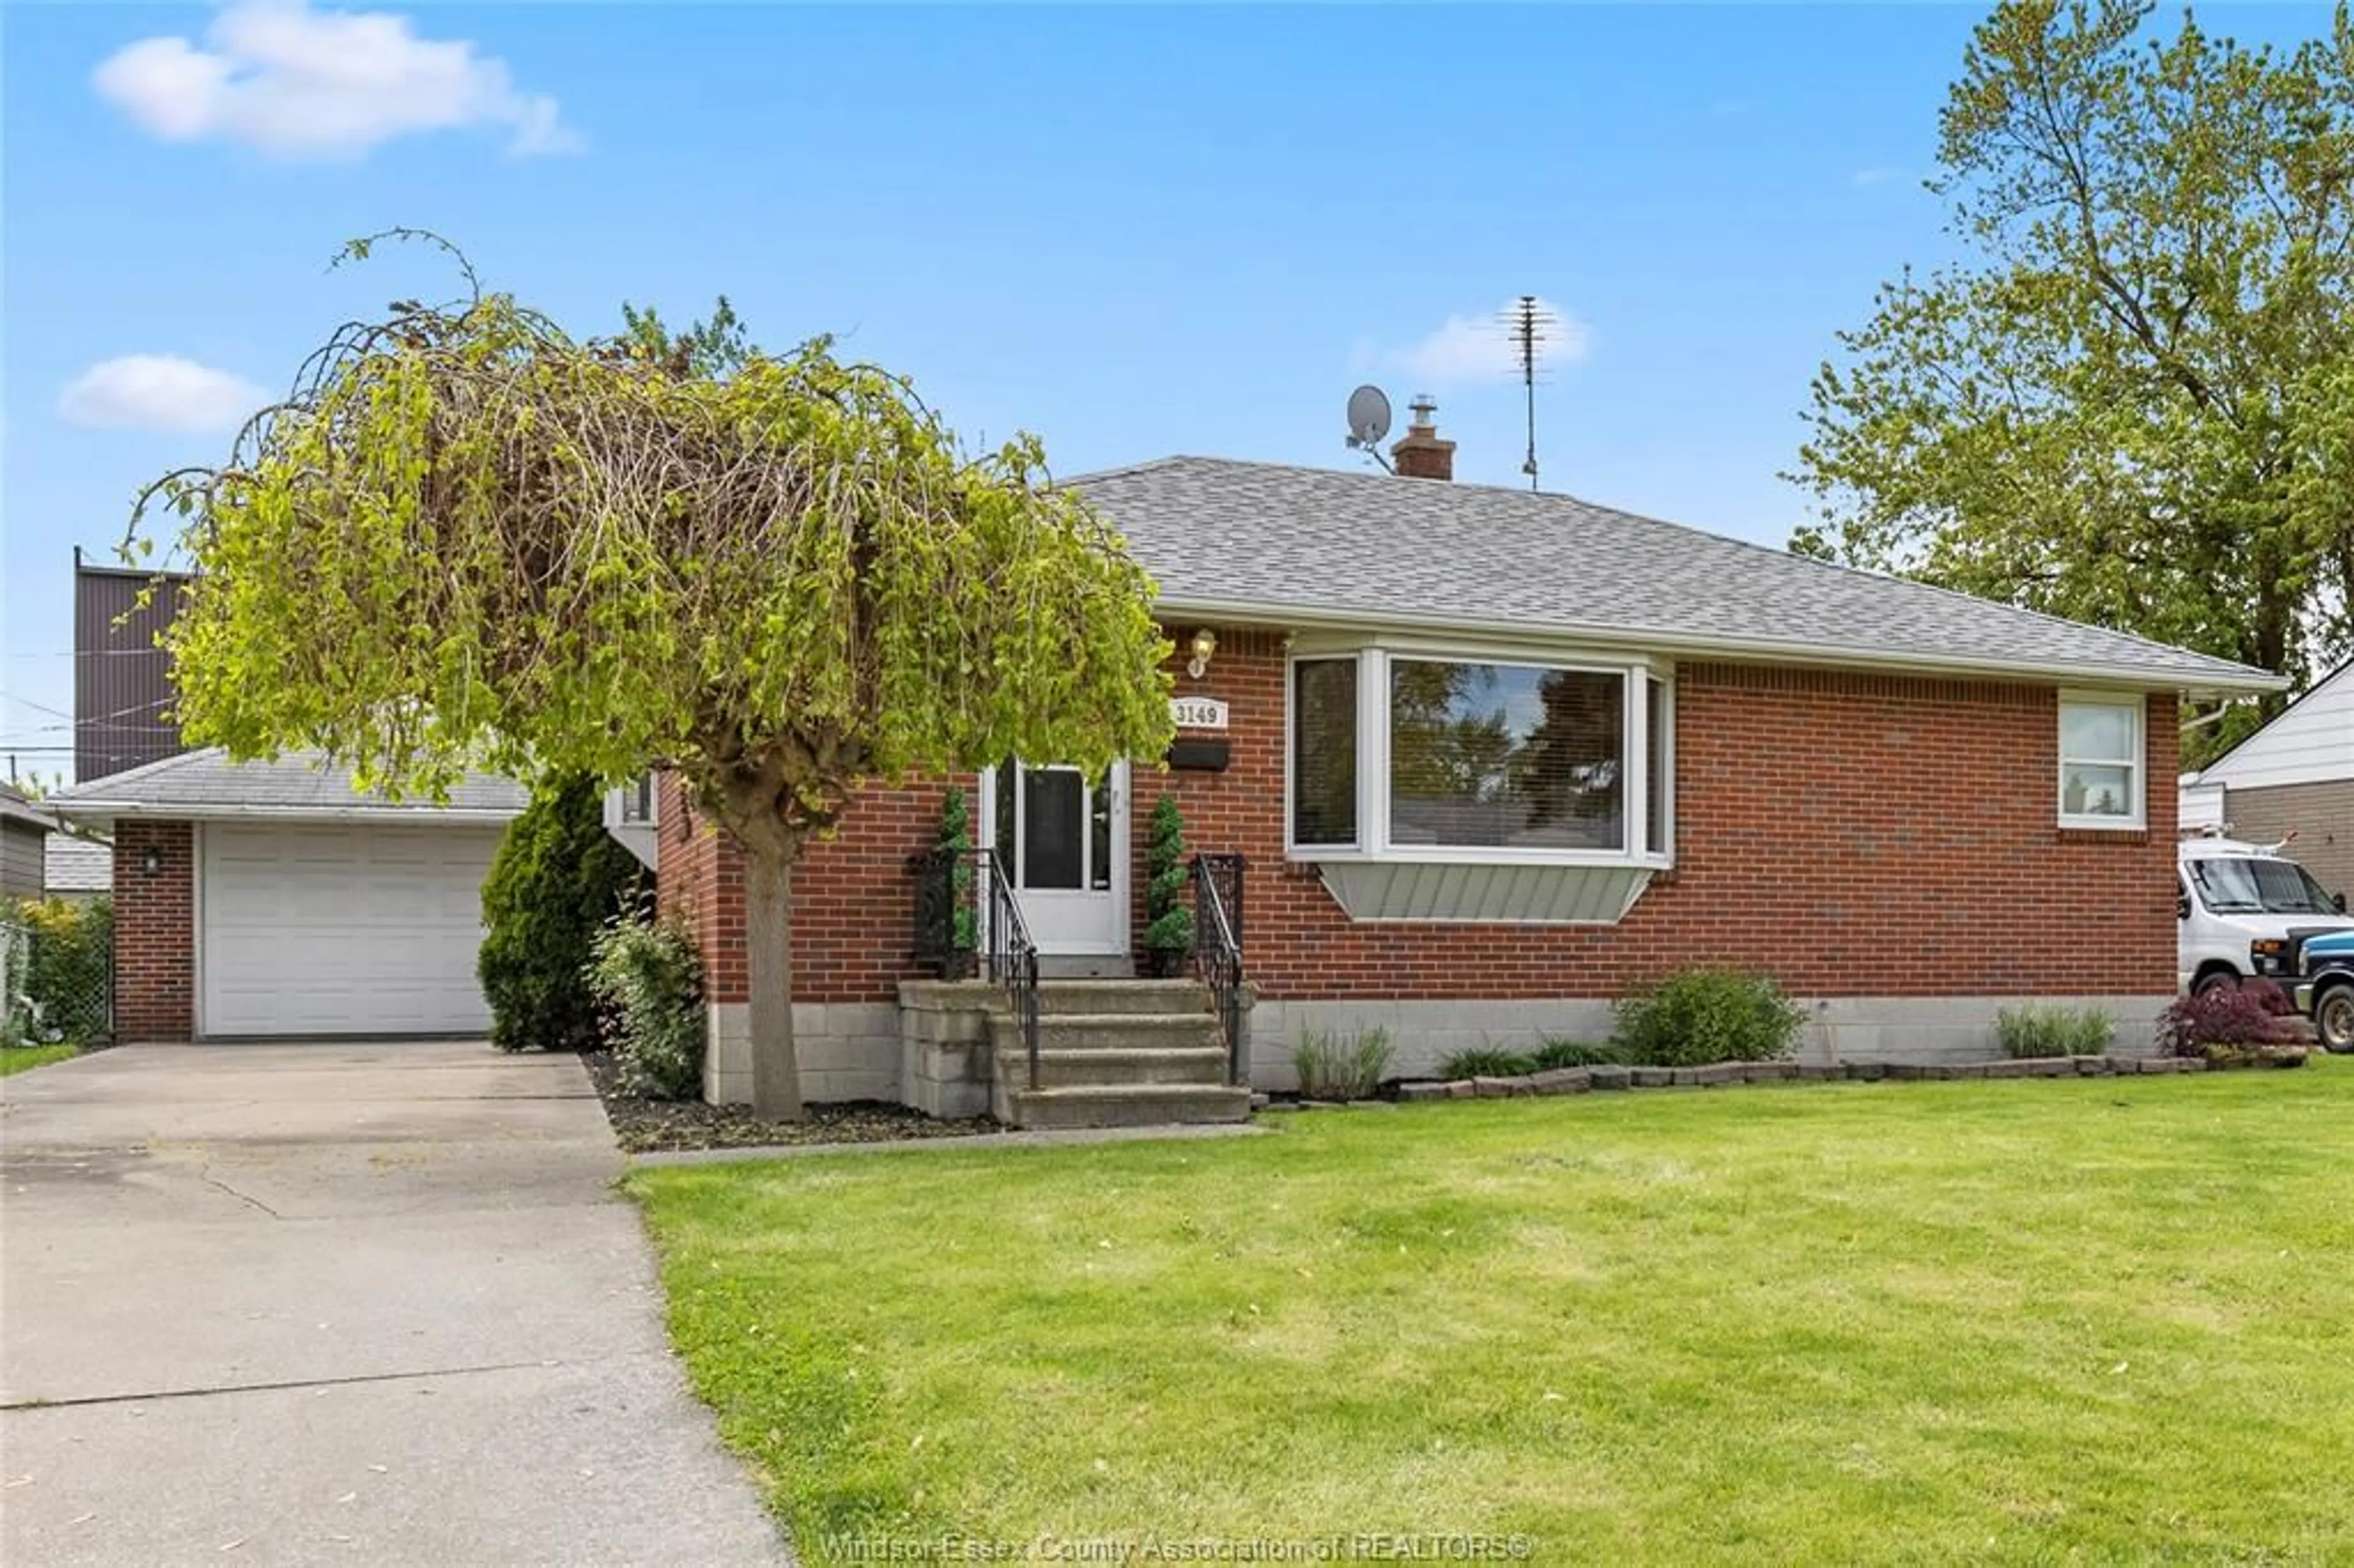 Frontside or backside of a home for 3149 WOODLAWN Ave, Windsor Ontario N8W 2H8